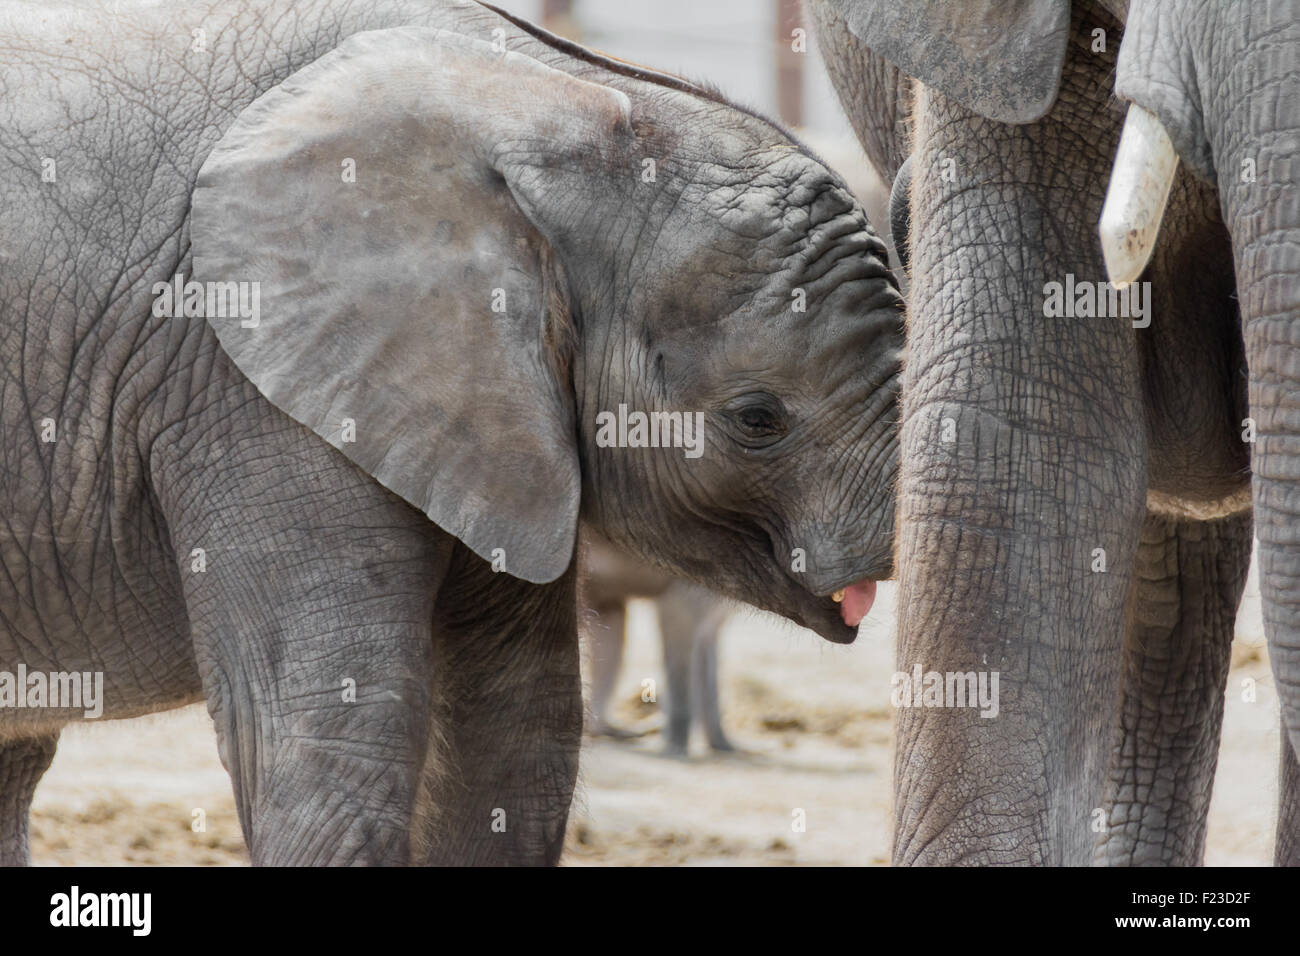 Young elephant calf drinking at mother Stock Photo